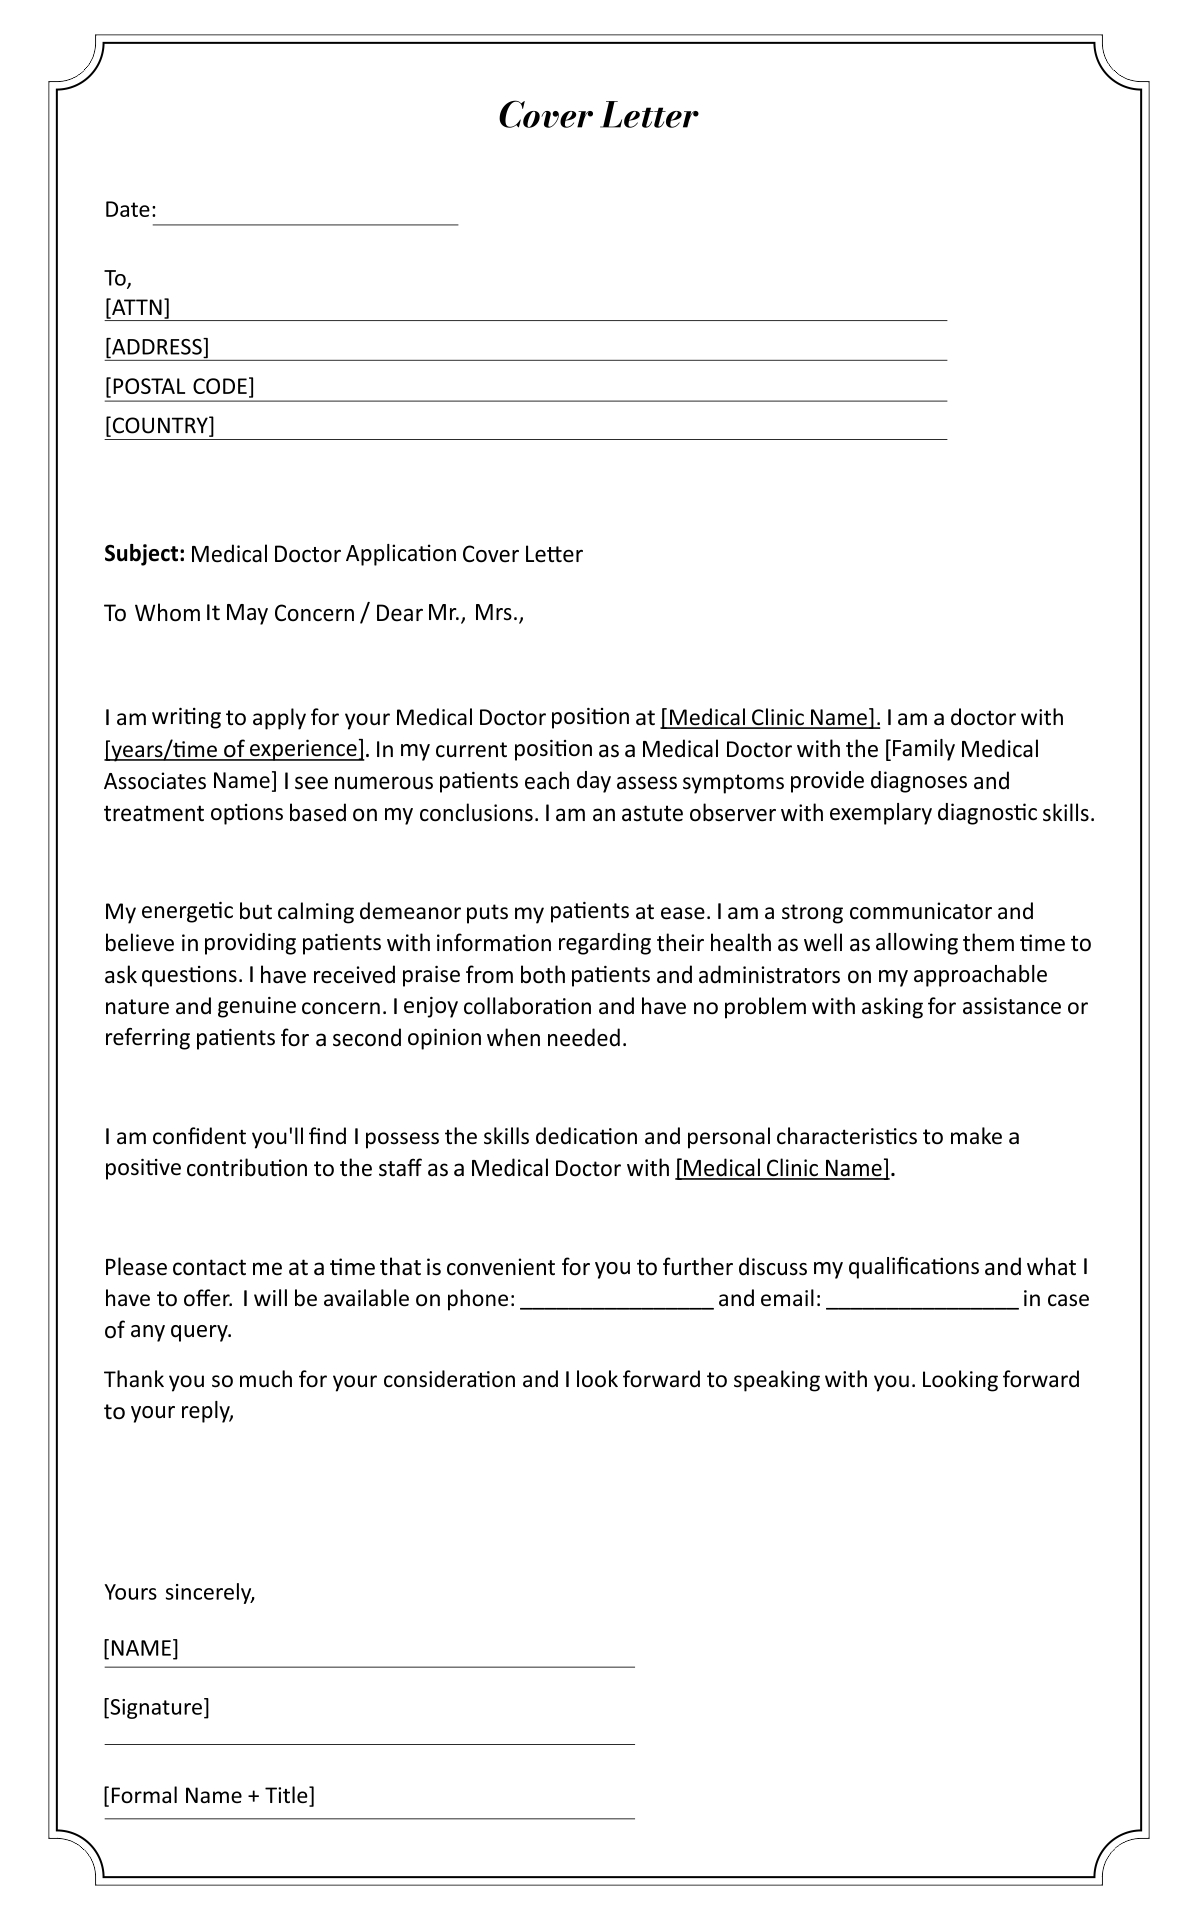 Printable Medical Doctor Application Cover Letter Template